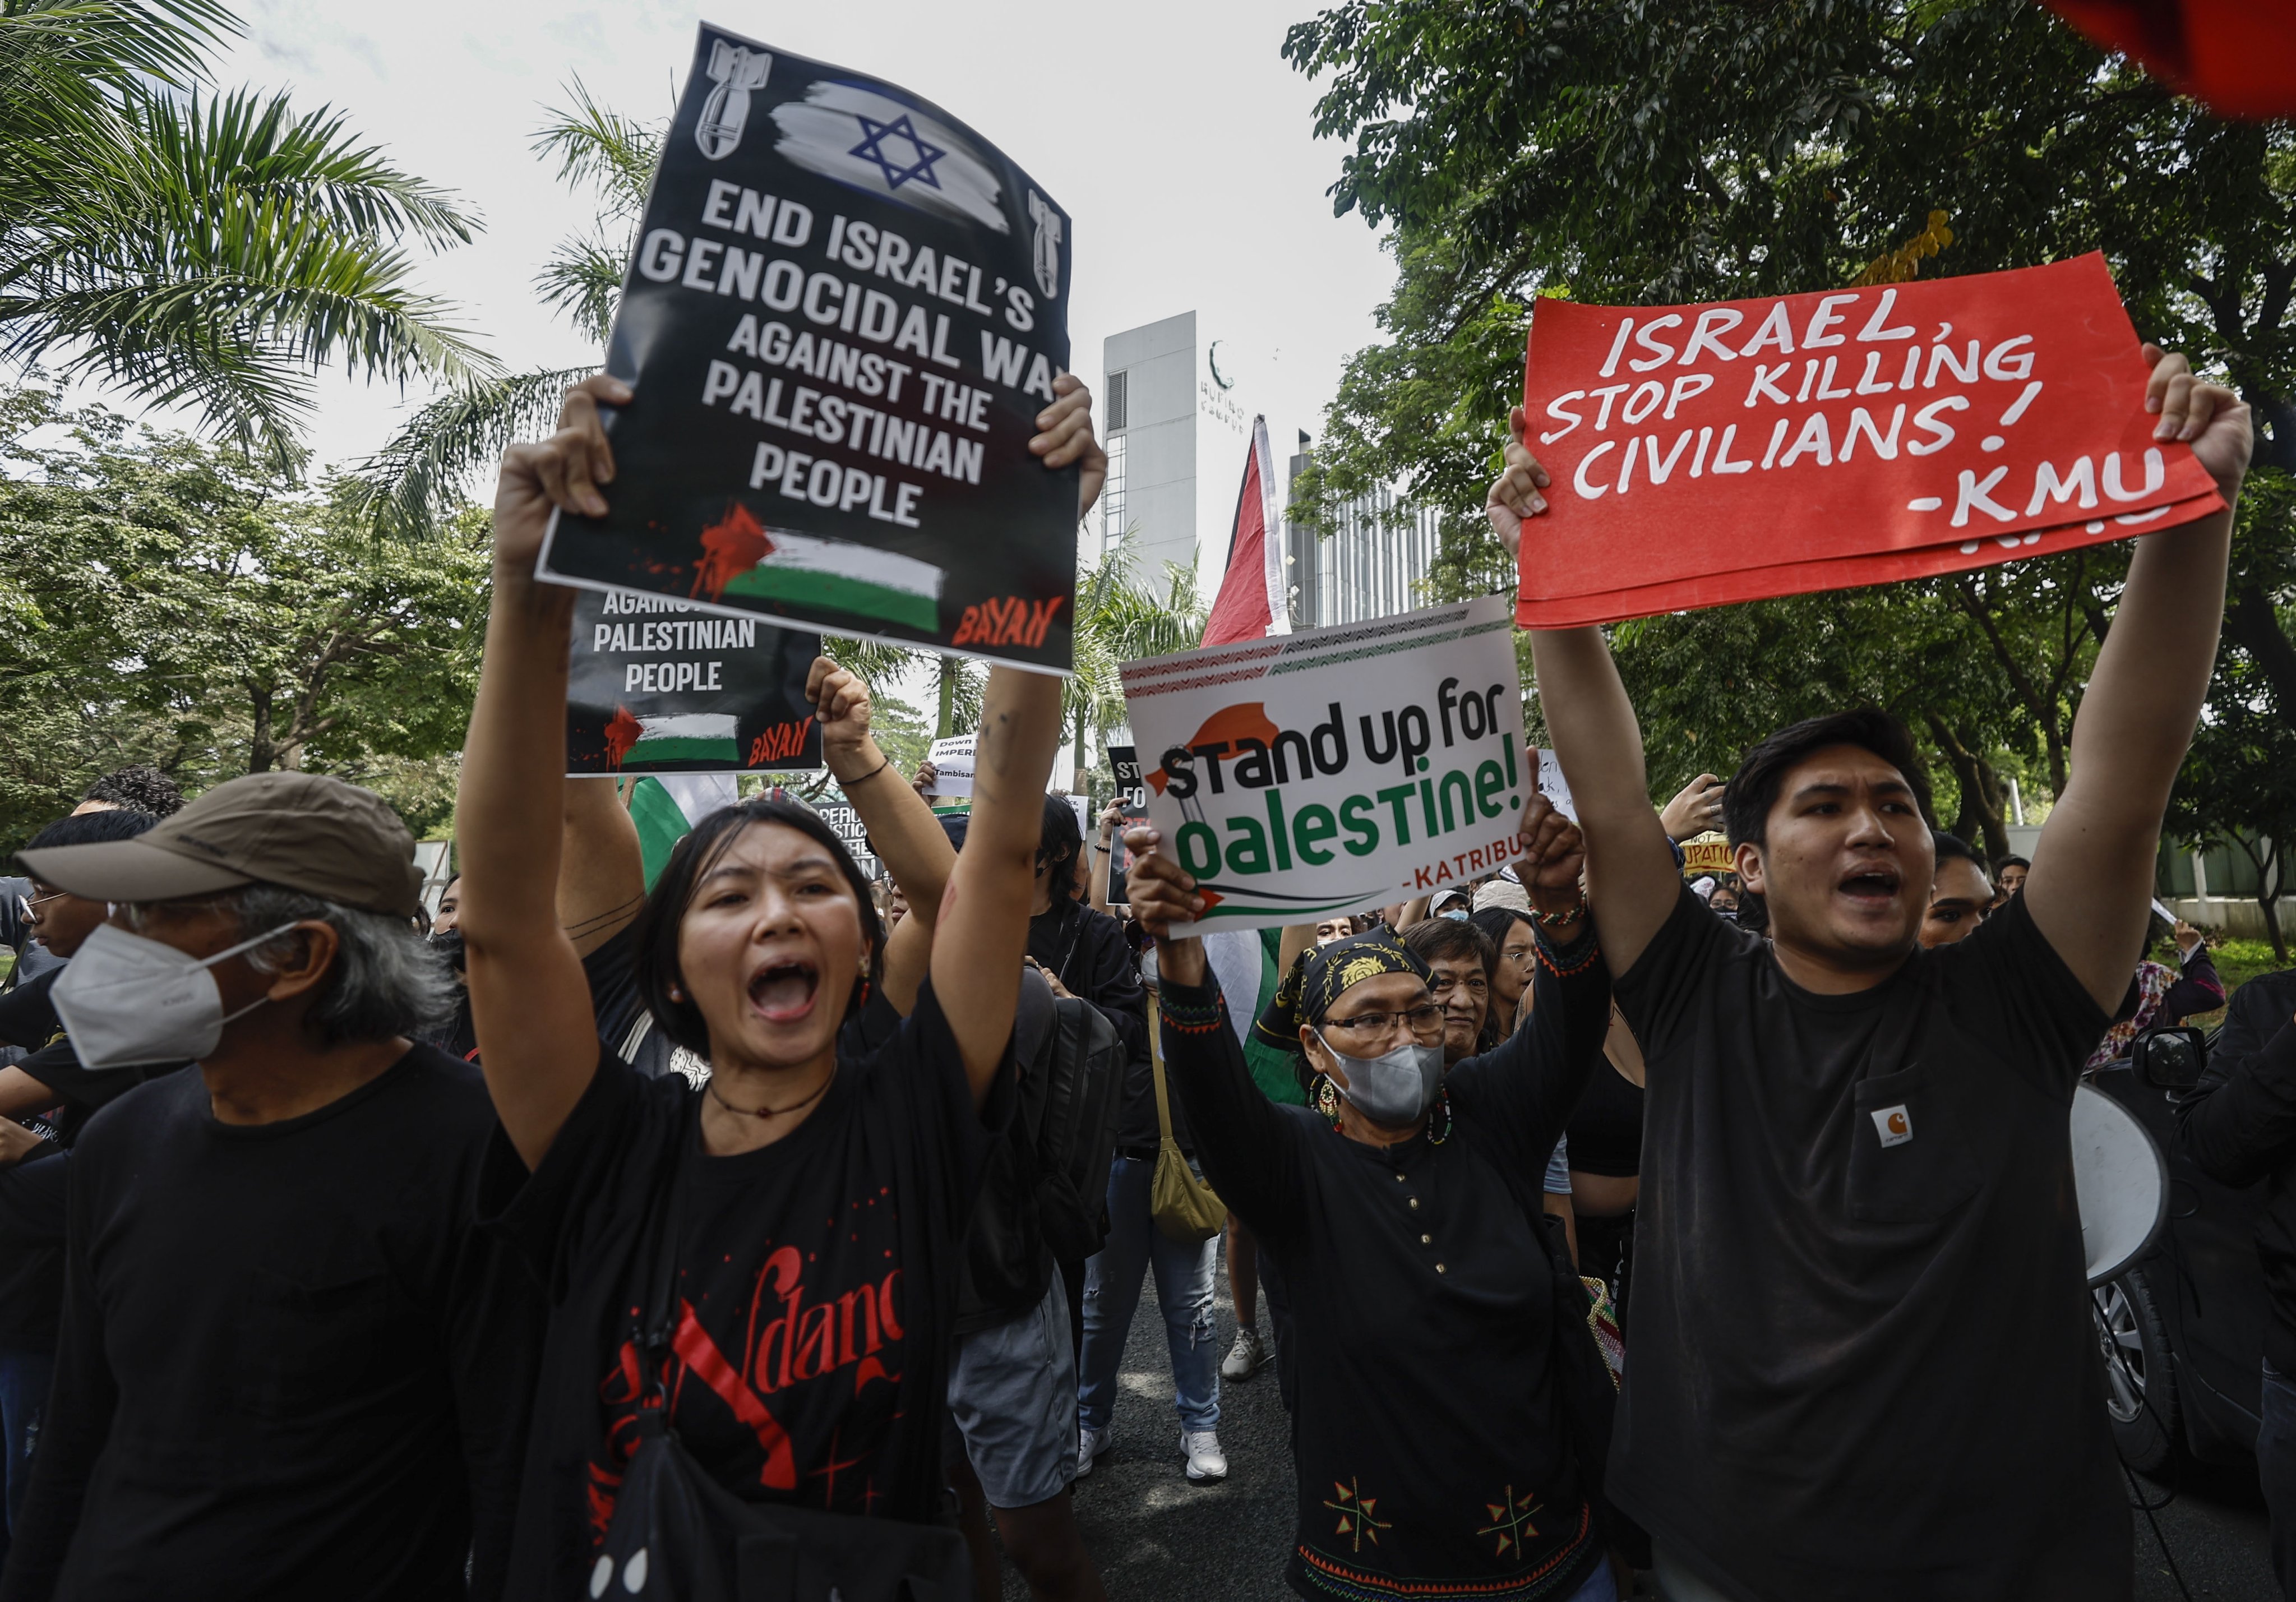 Protesters carry placards at a rally in support of the Palestinian people in Taguig City, Metro Manila, on Tuesday. Photo: EPA-EFE